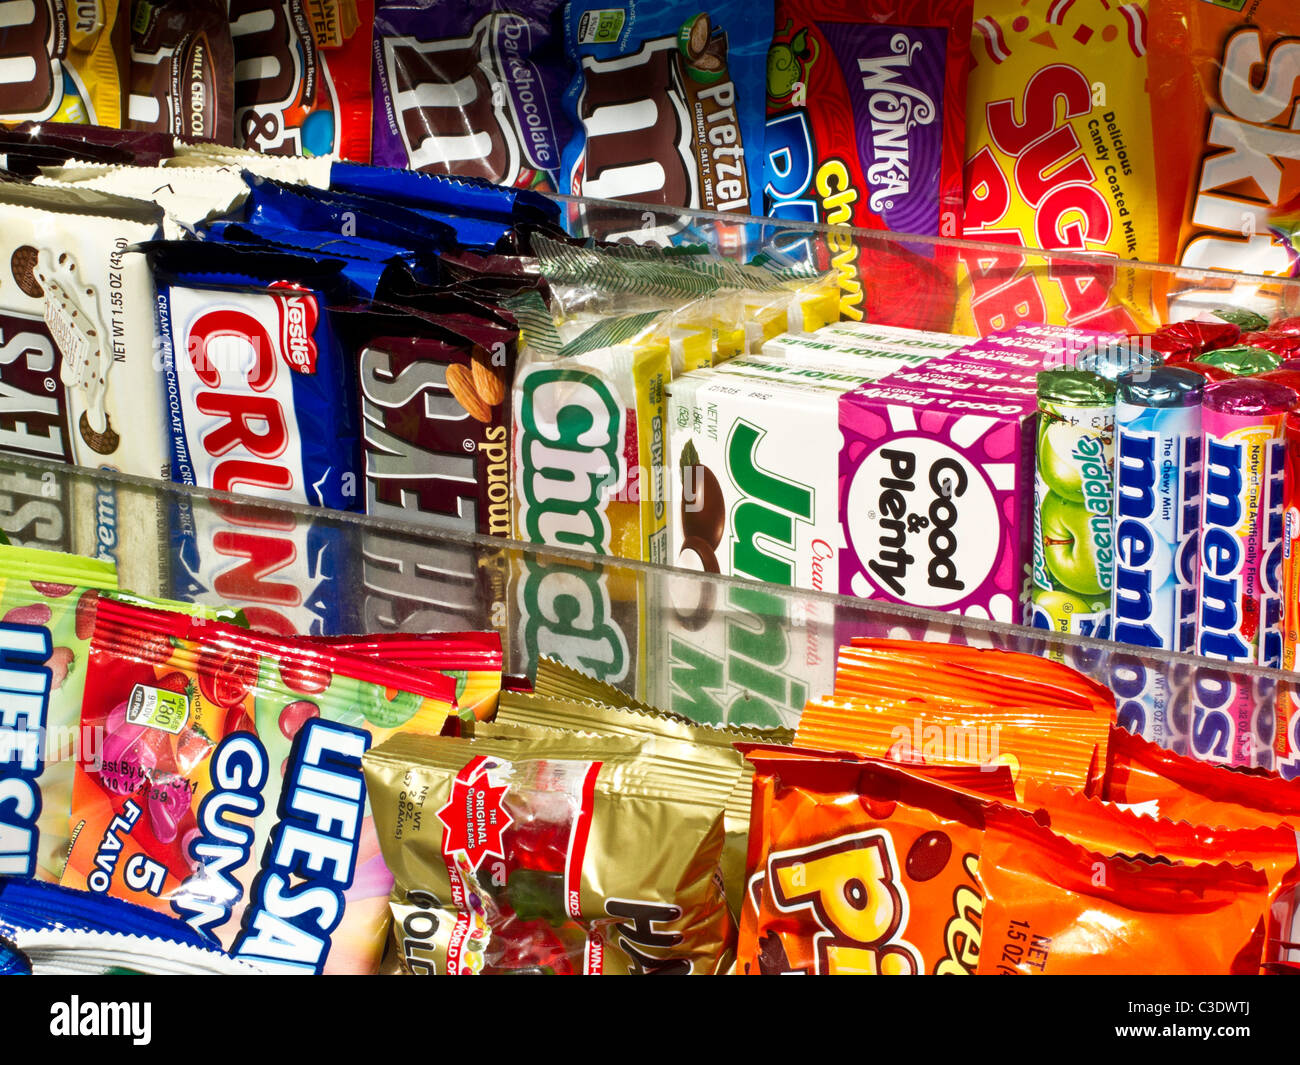 Rows of Candy, Street Vendor Display Stock Photo